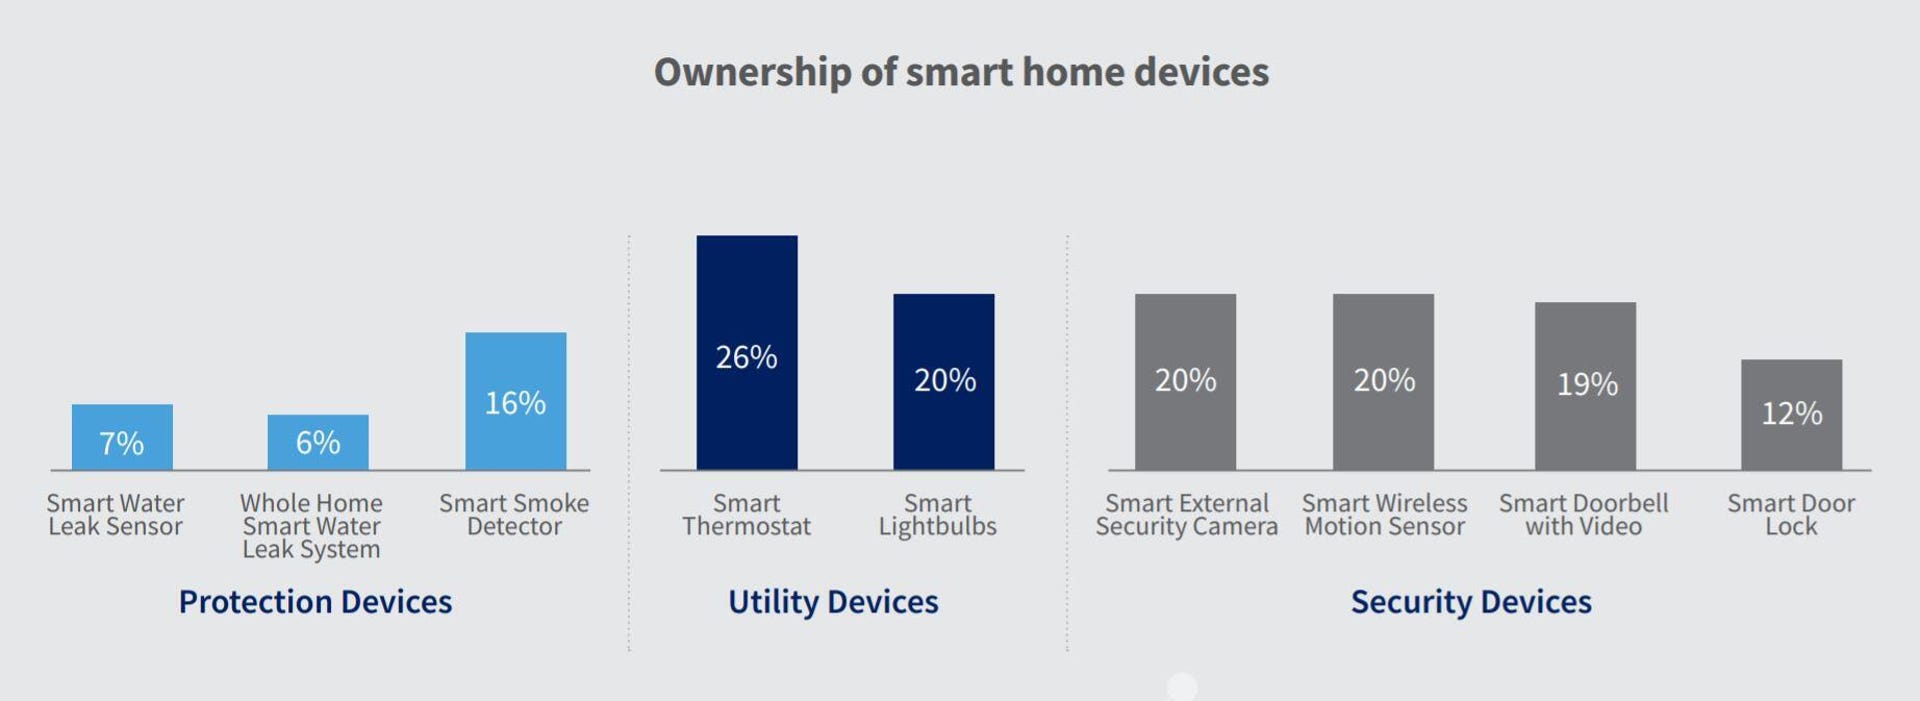 smart-home-device-category-ownership-2019